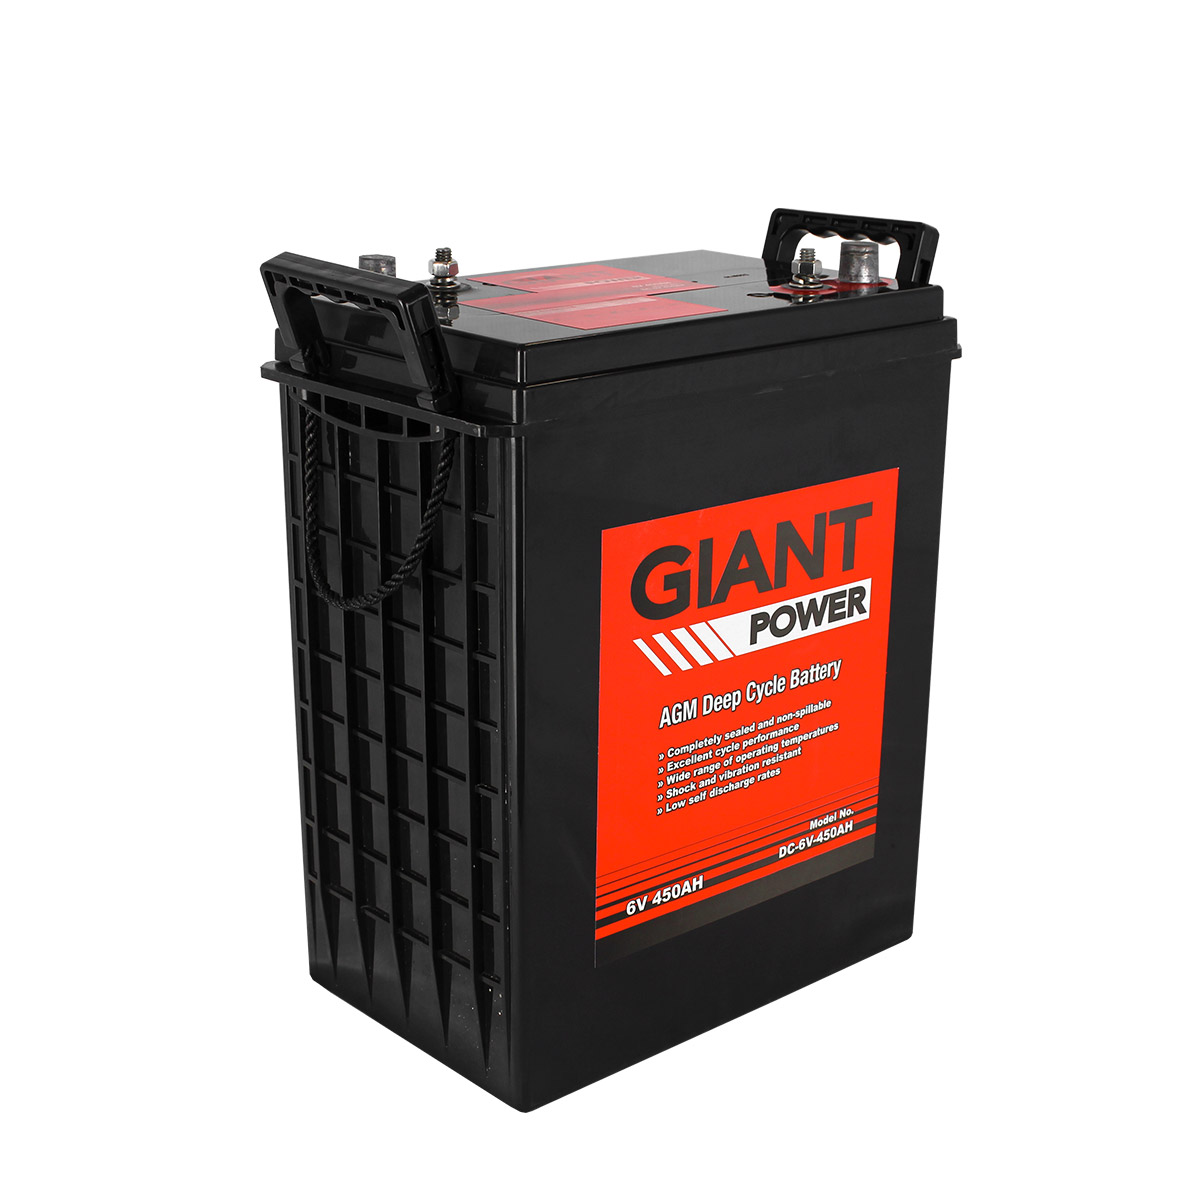 Giant Power residential battery storage solutions Solar